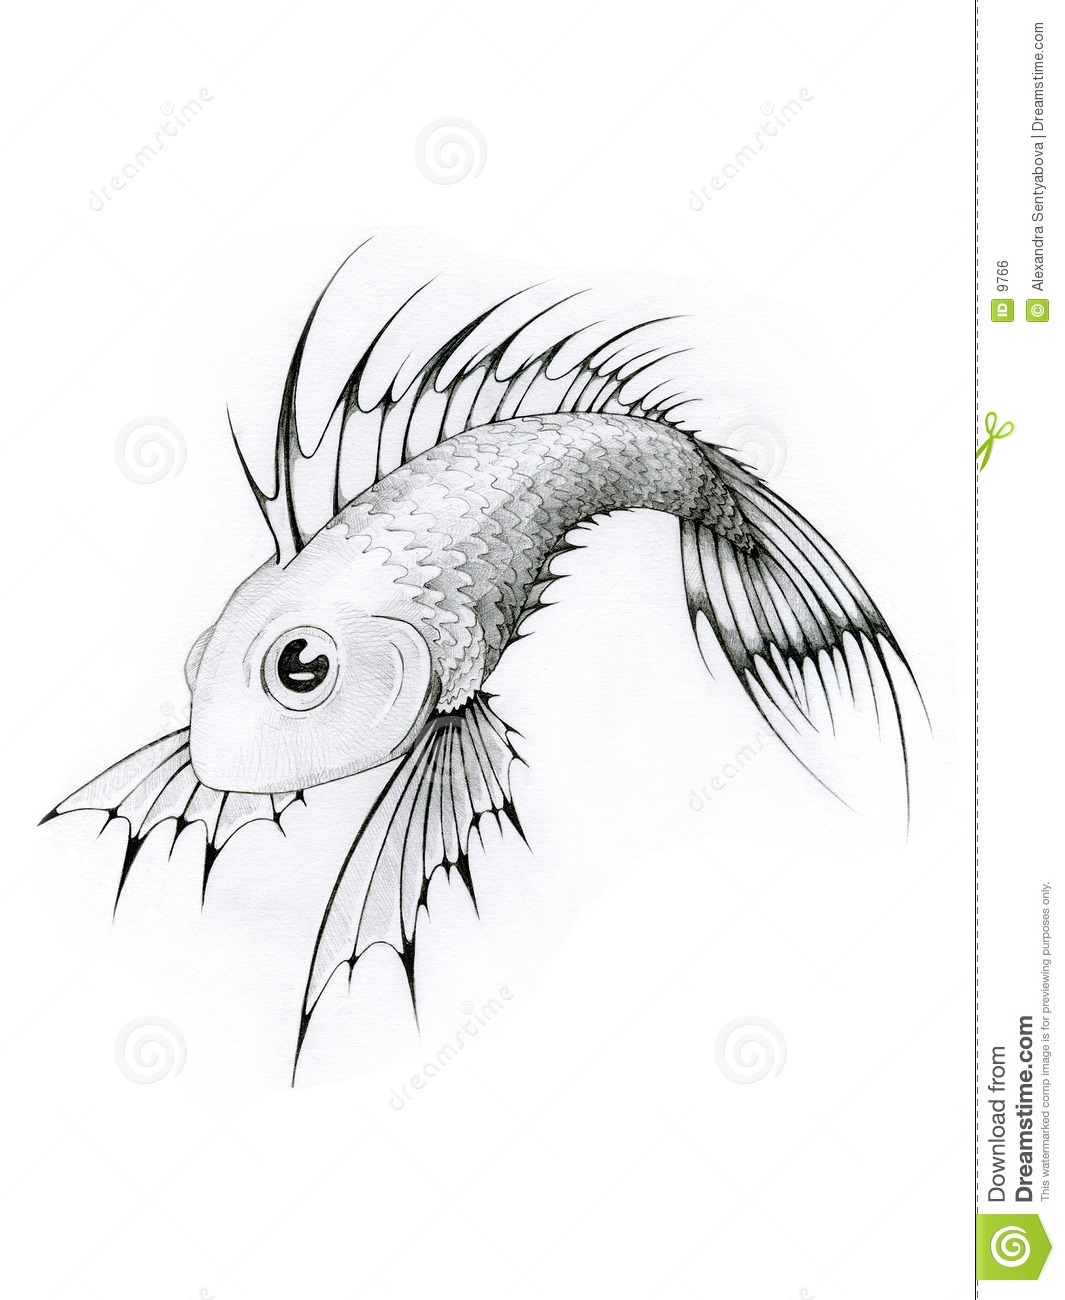 Black And White Tropical Fish Royalty Free Stock Image   Image  9766